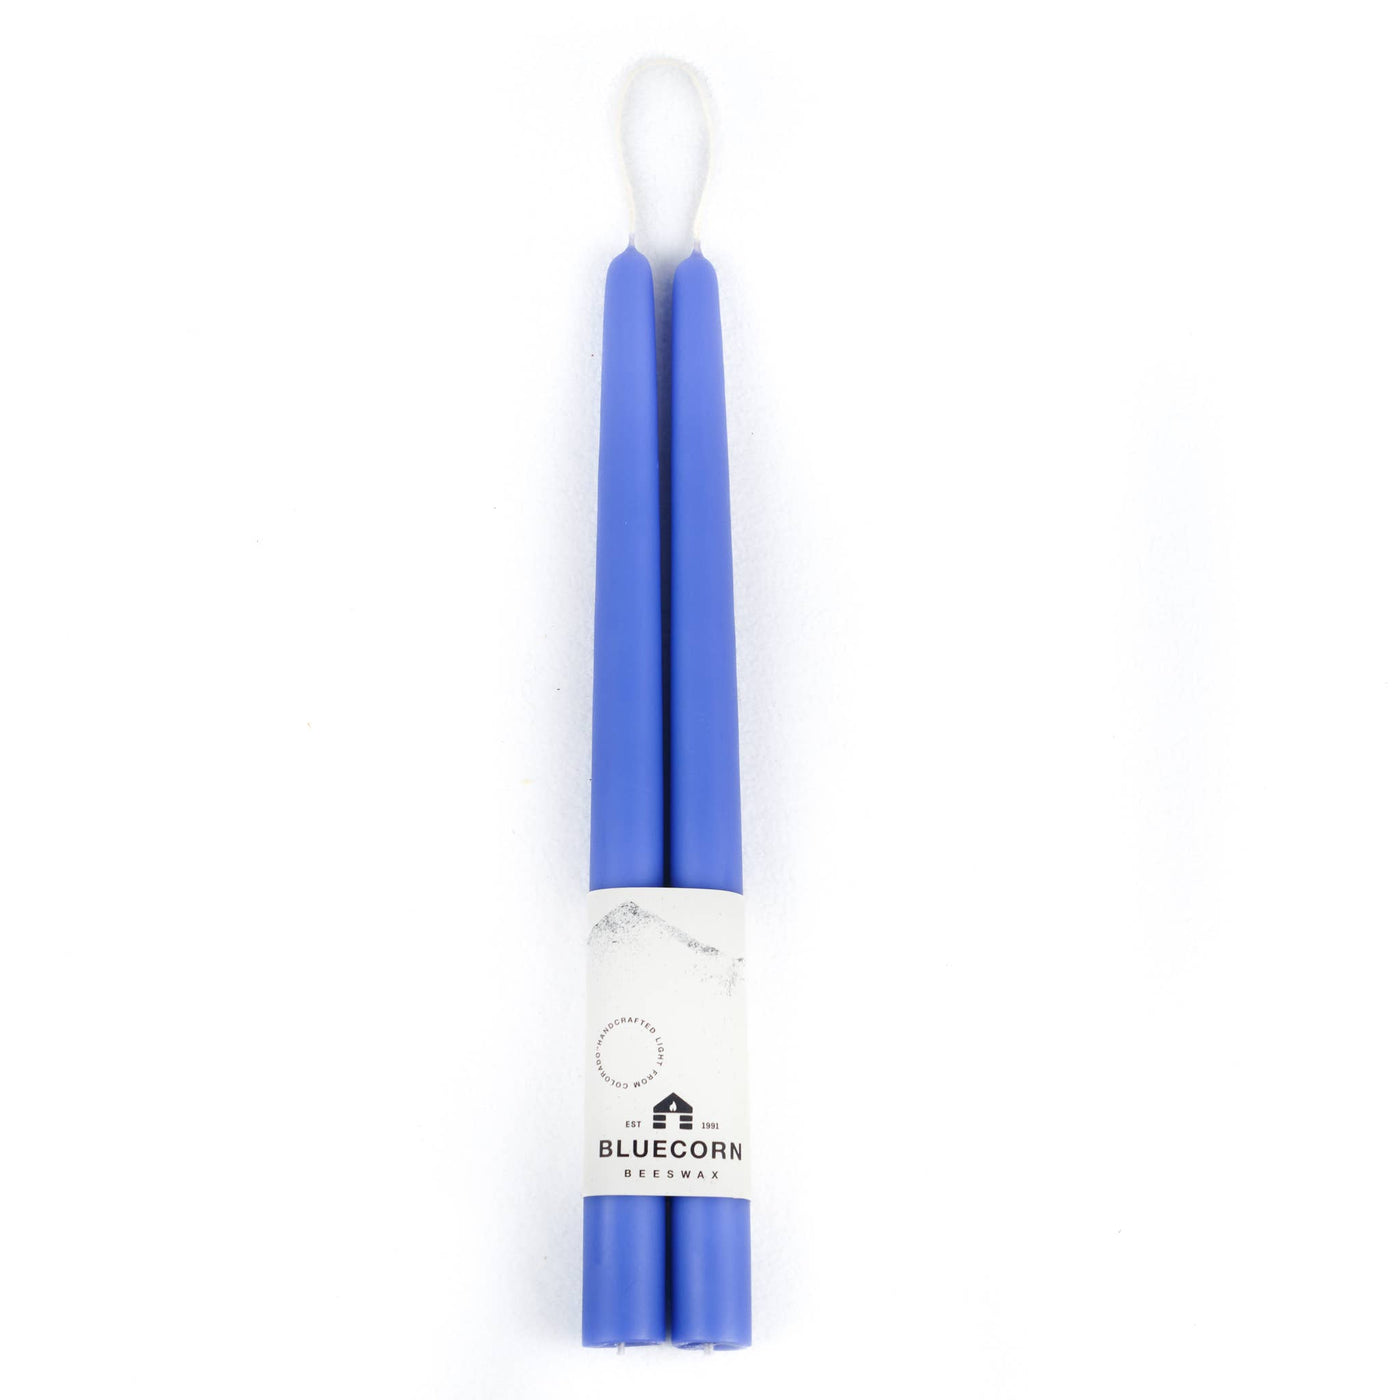 Pair of Hand-Dipped Beeswax Taper Candles - Periwinkle